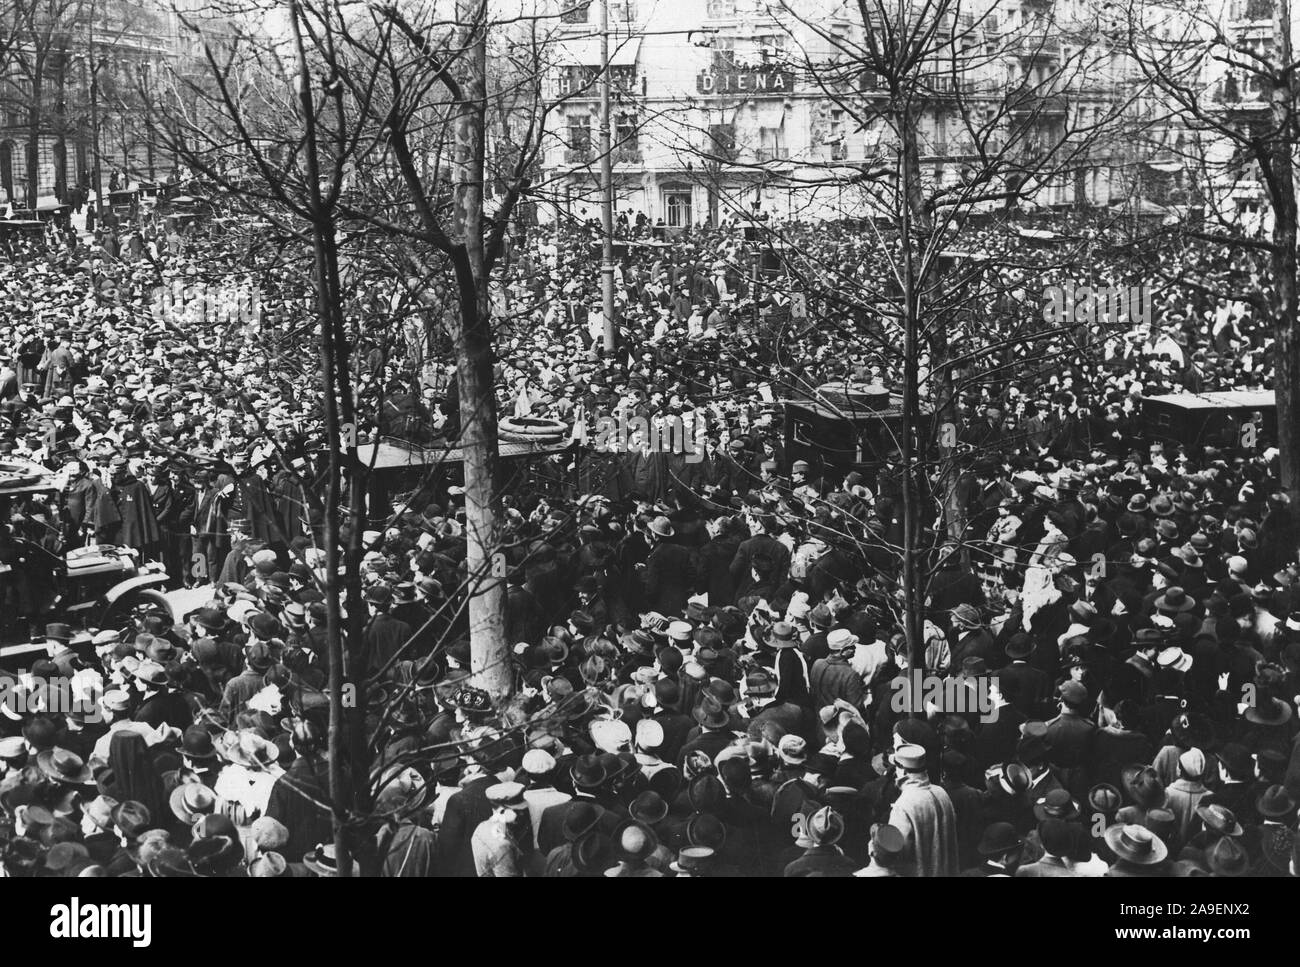 Ceremonies - Liberations - France - A section of the great crowd in the Place de Iena, Paris during the celebration on April 22, 1917 of 'America Day' in Paris Stock Photo